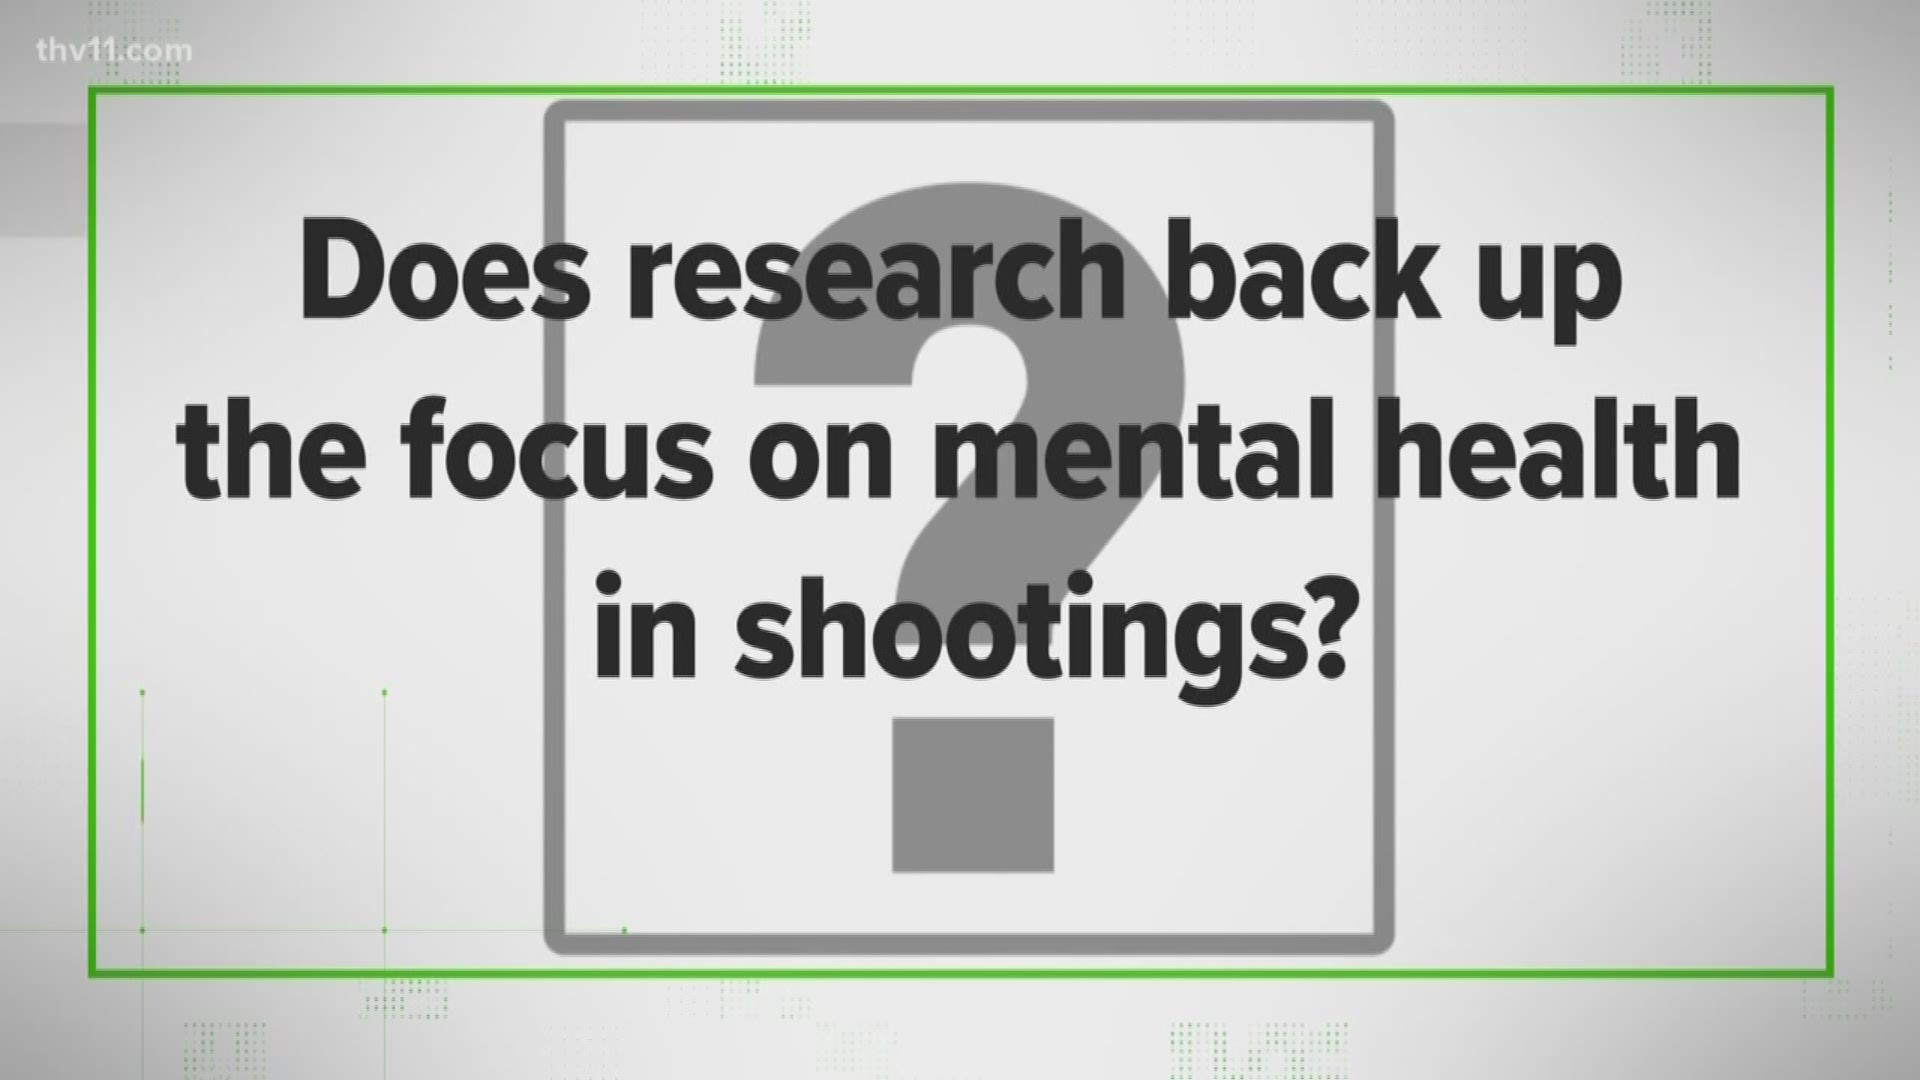 And polls show that more than half of Americans believe failing to identify mental health problems is a major cause of gun violence. 

But do the numbers and research back that idea or not?